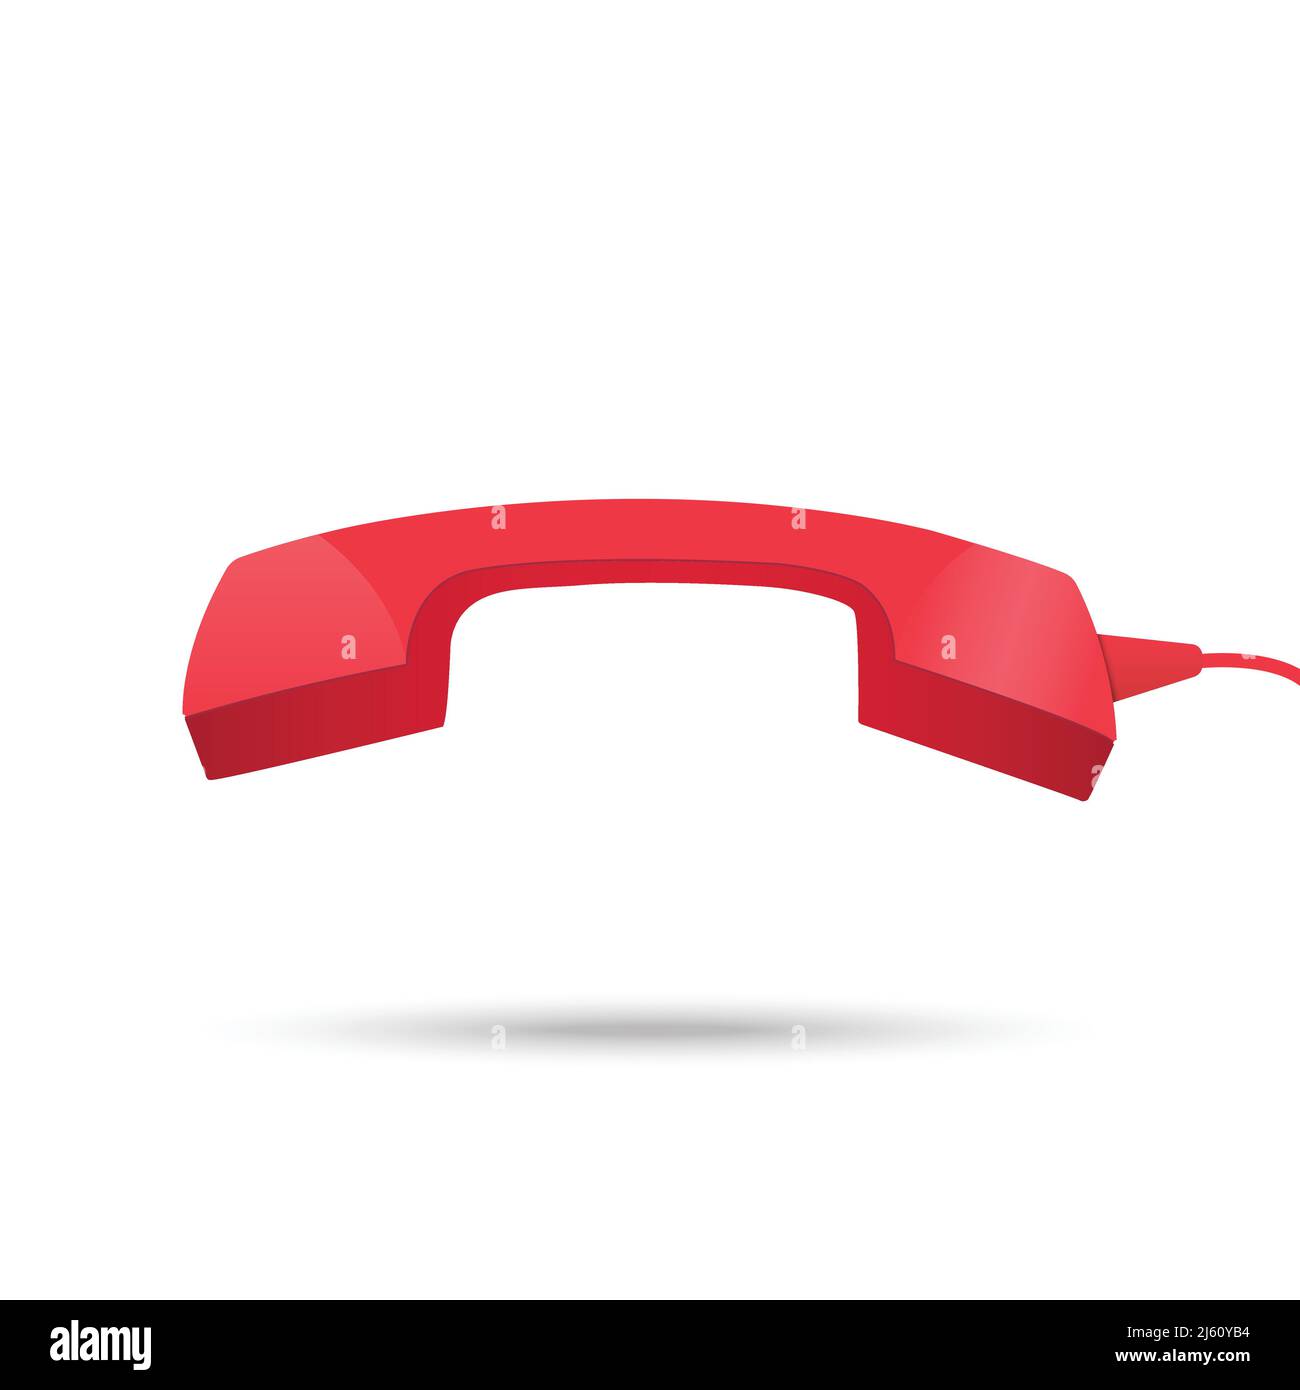 Red phone receiver icon Stock Vector